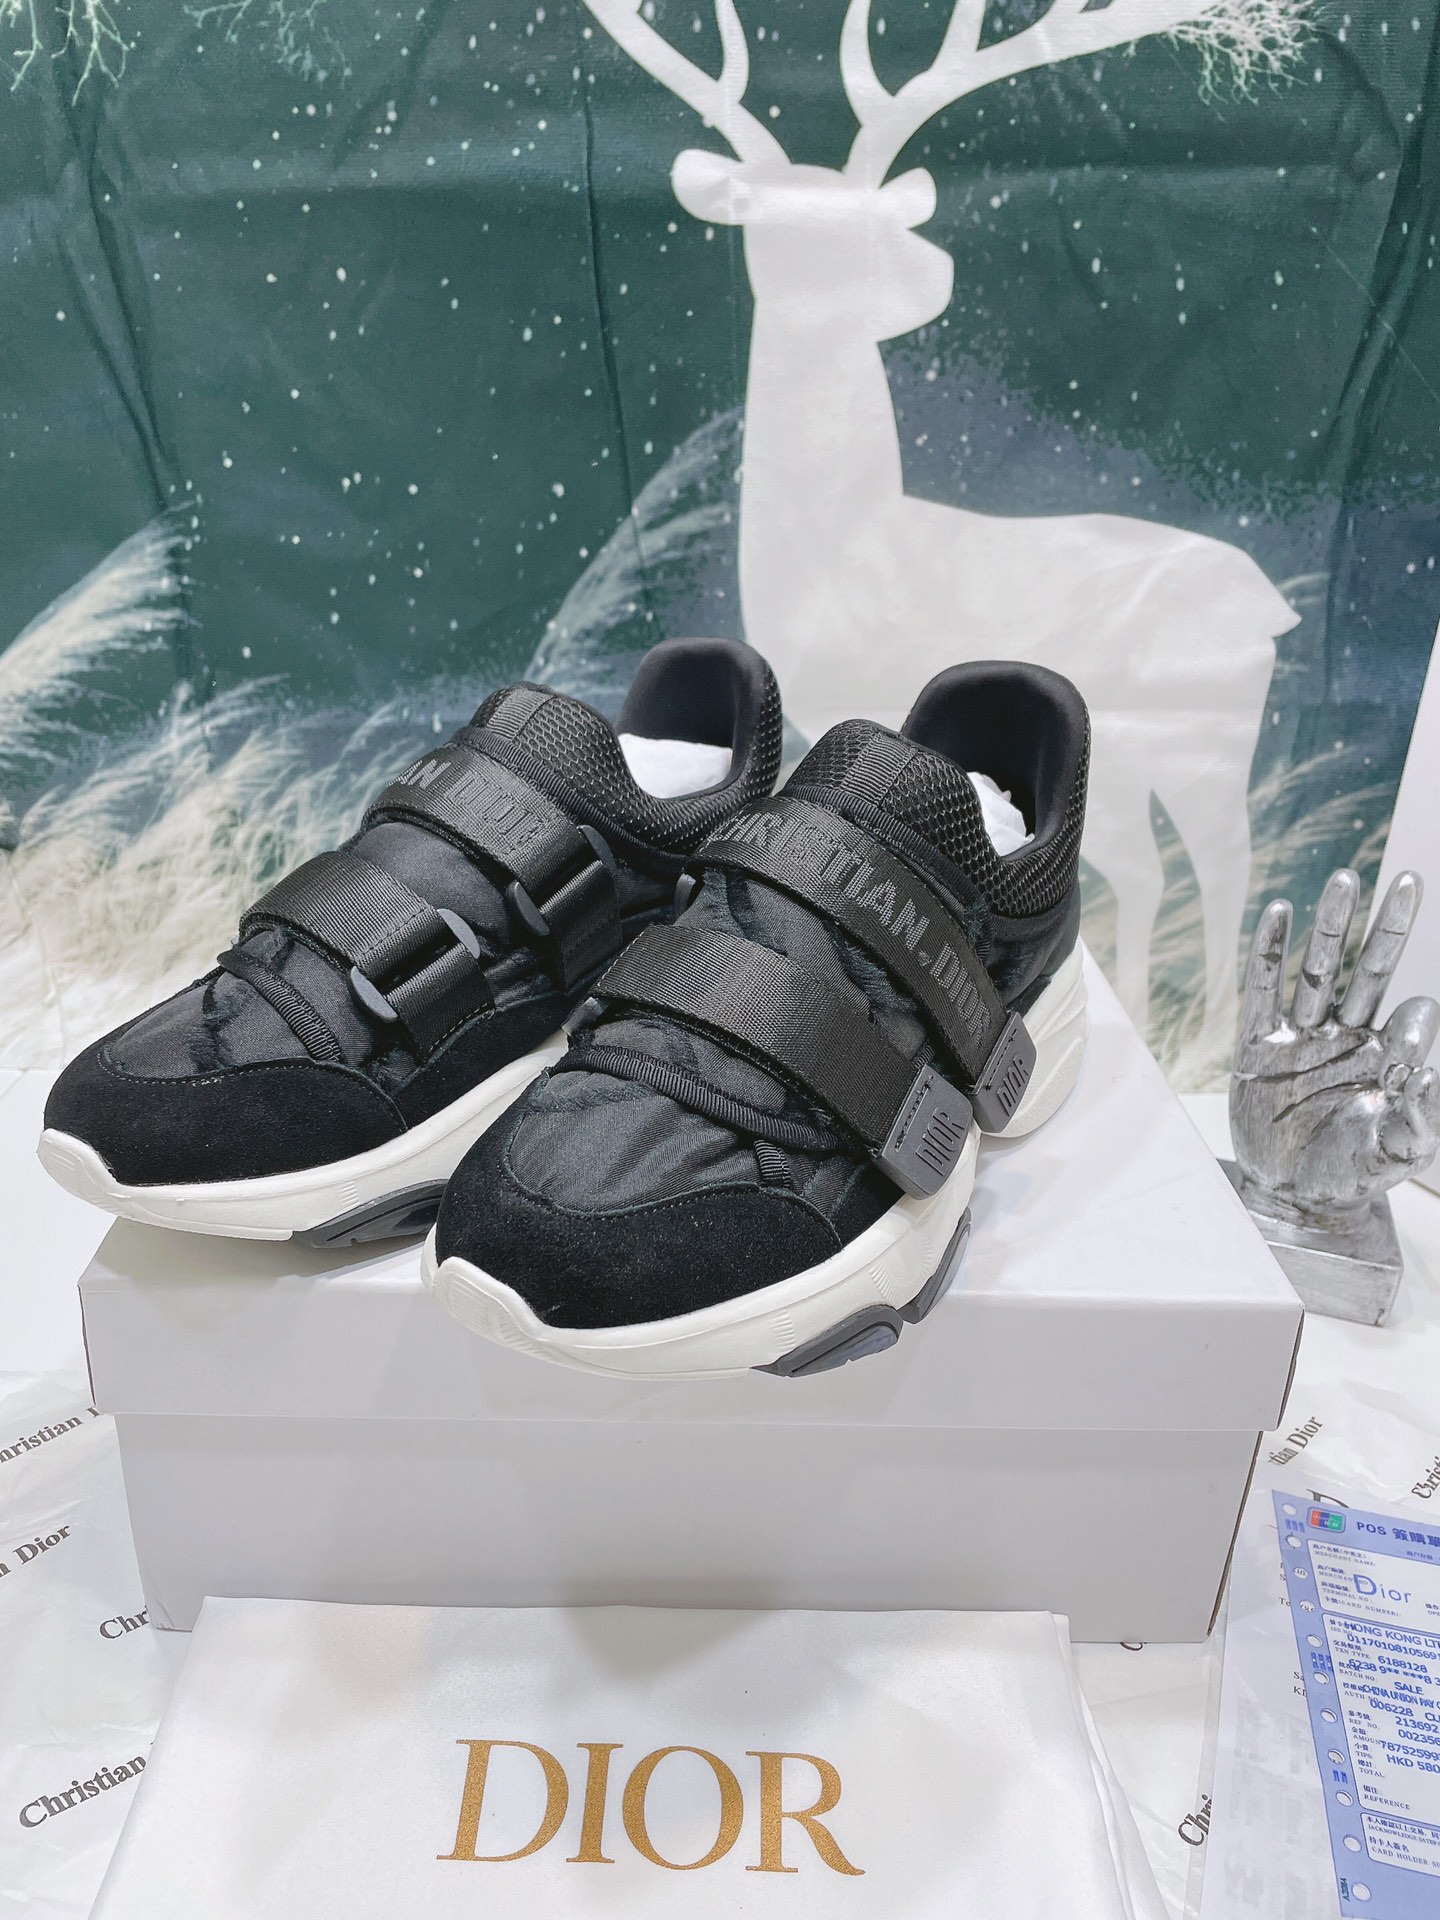 Dior Shoes Sneakers Black Embroidery Sweatpants